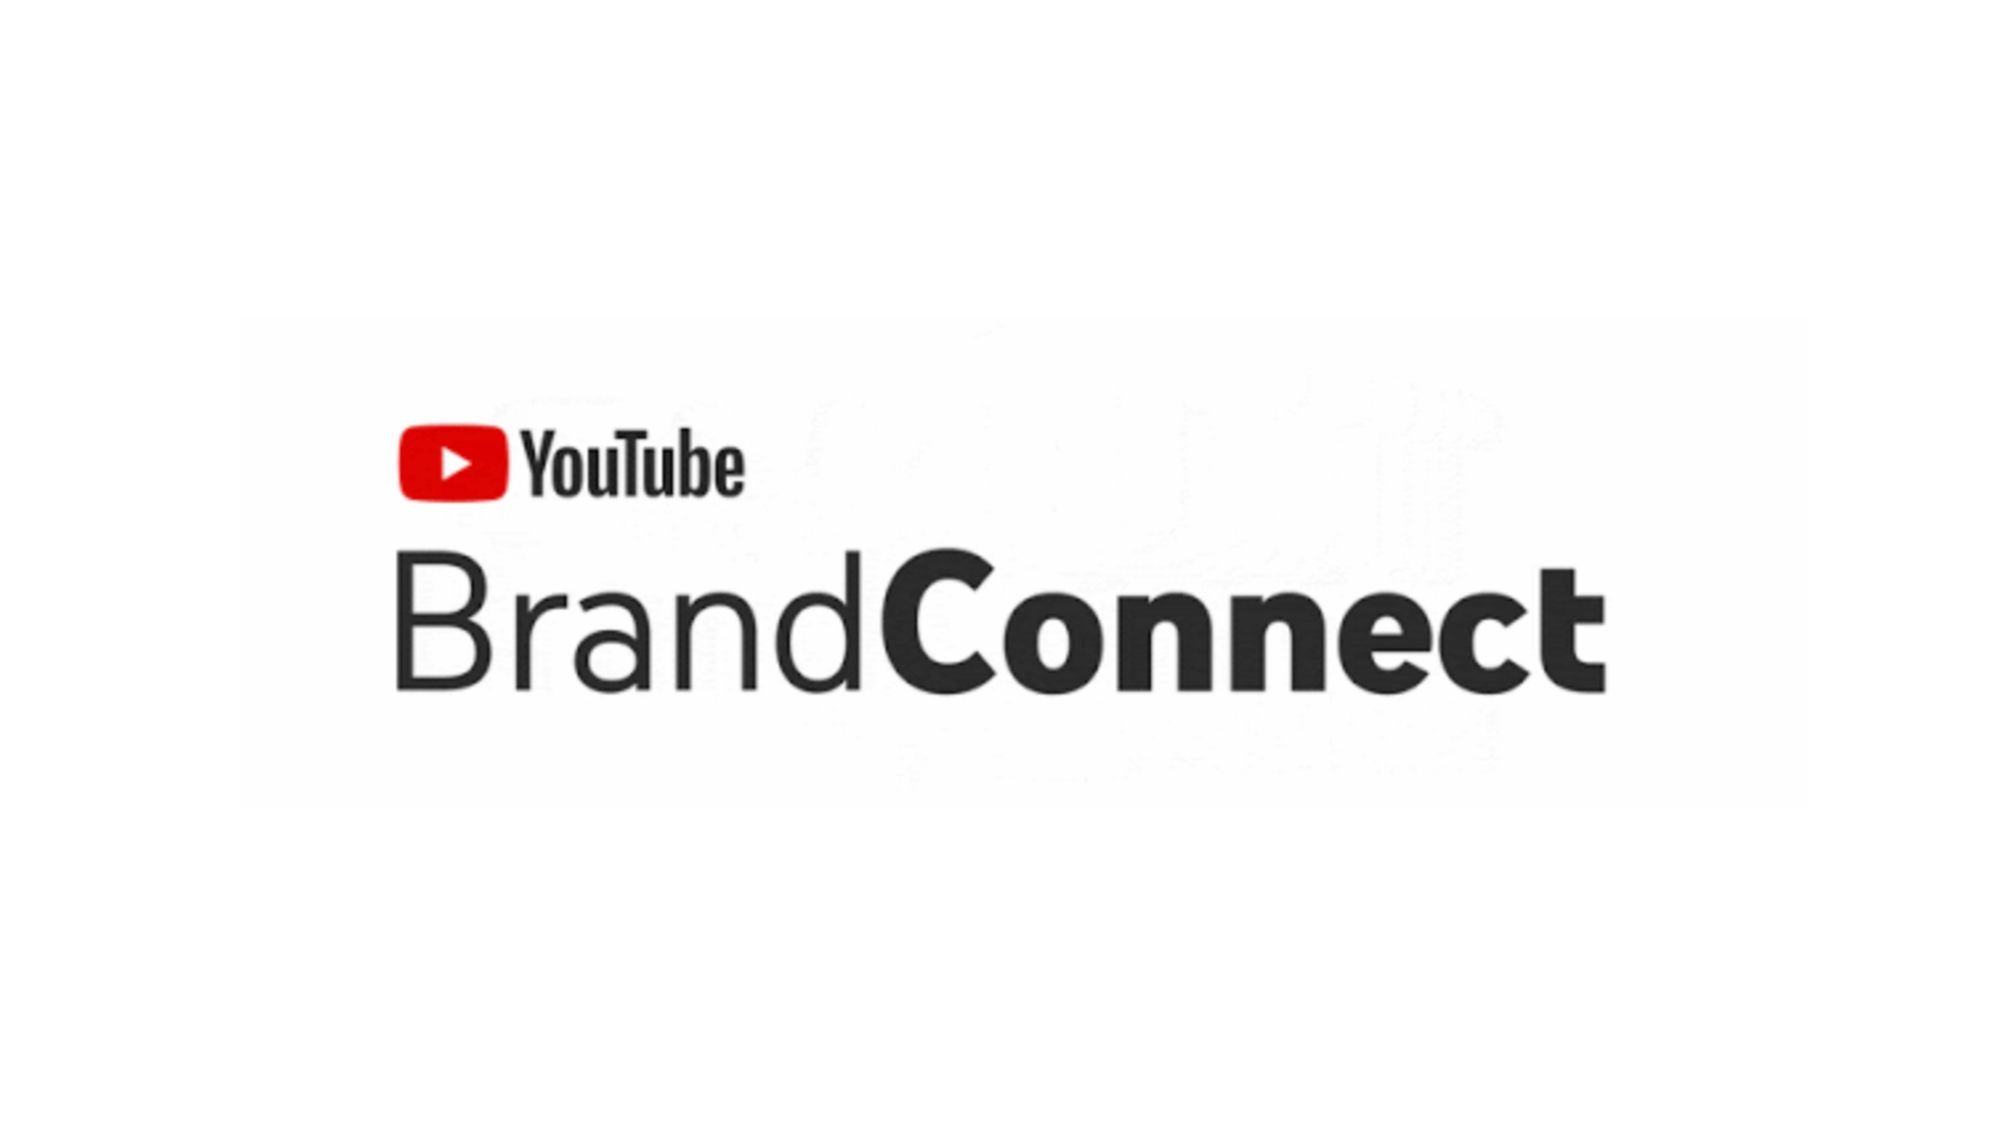 YouTube Brand Connect